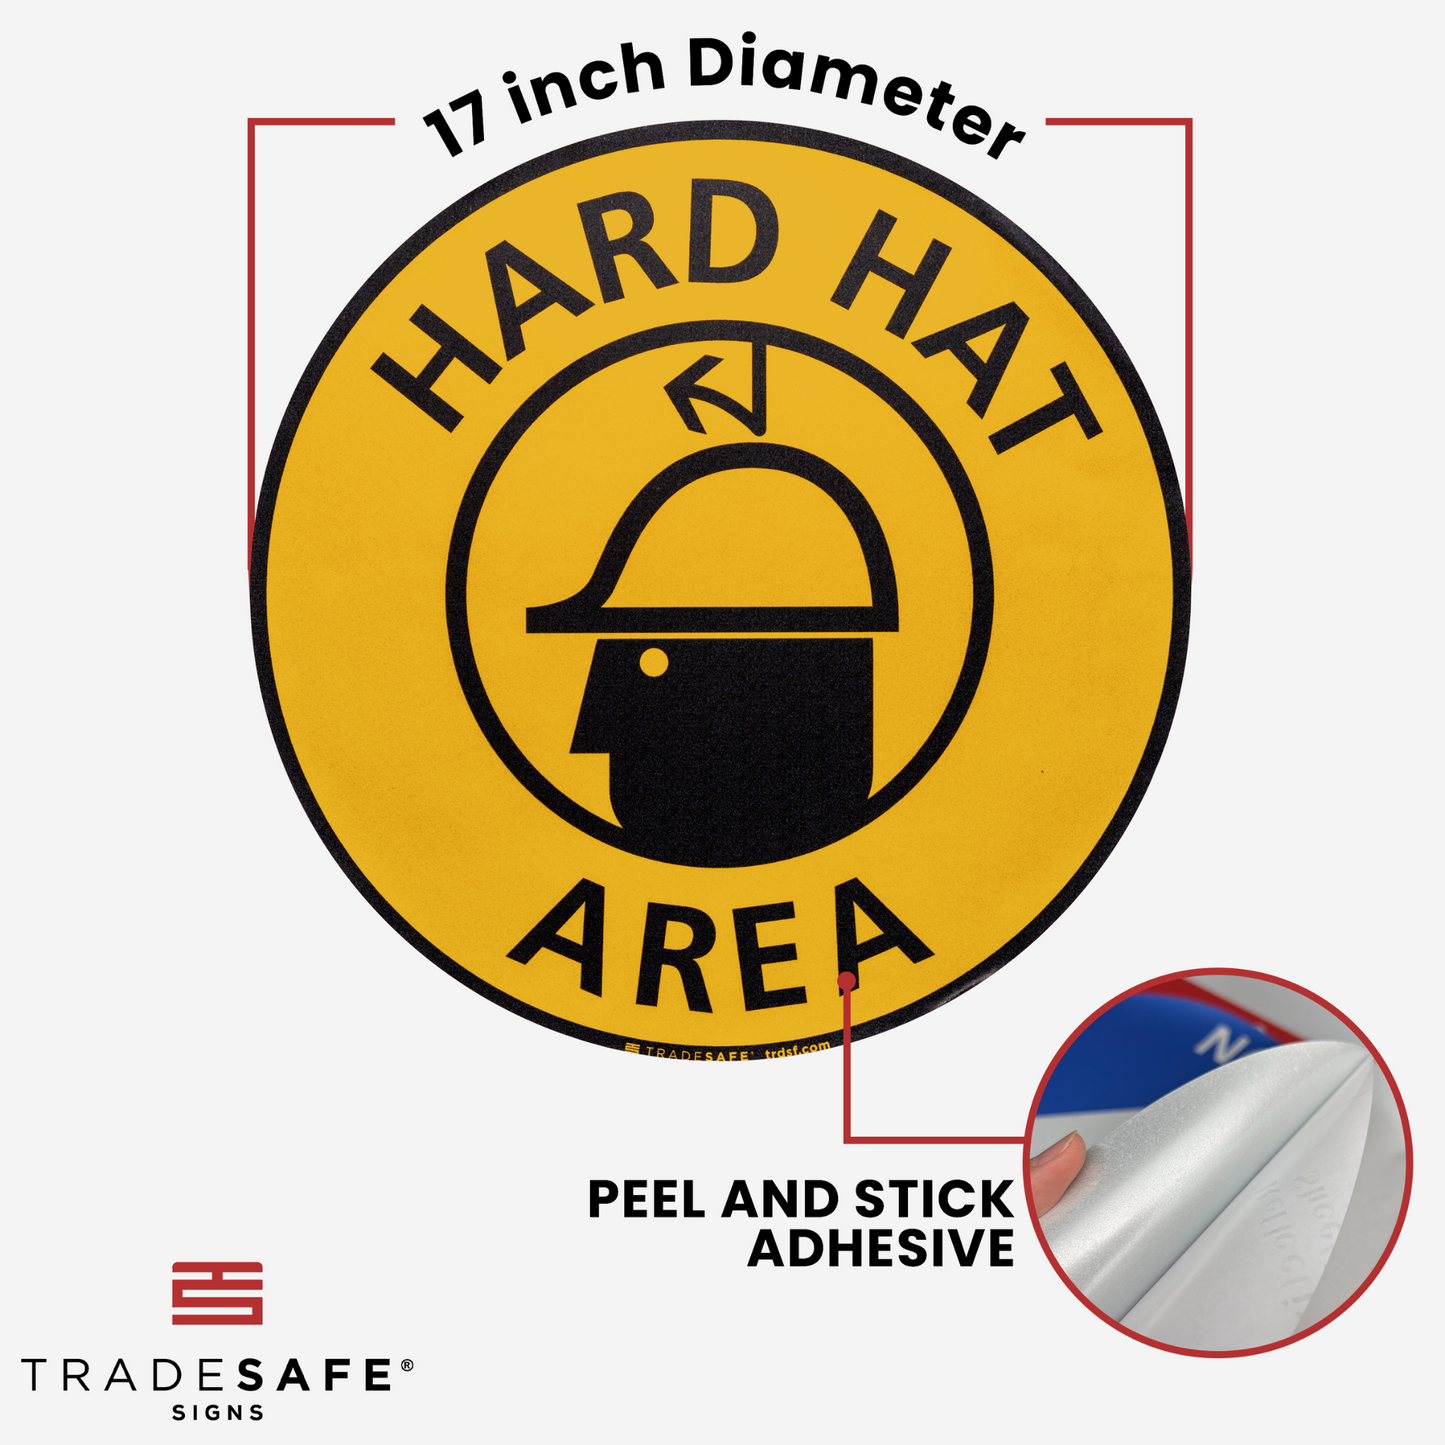 dimensions of hard hat area sign